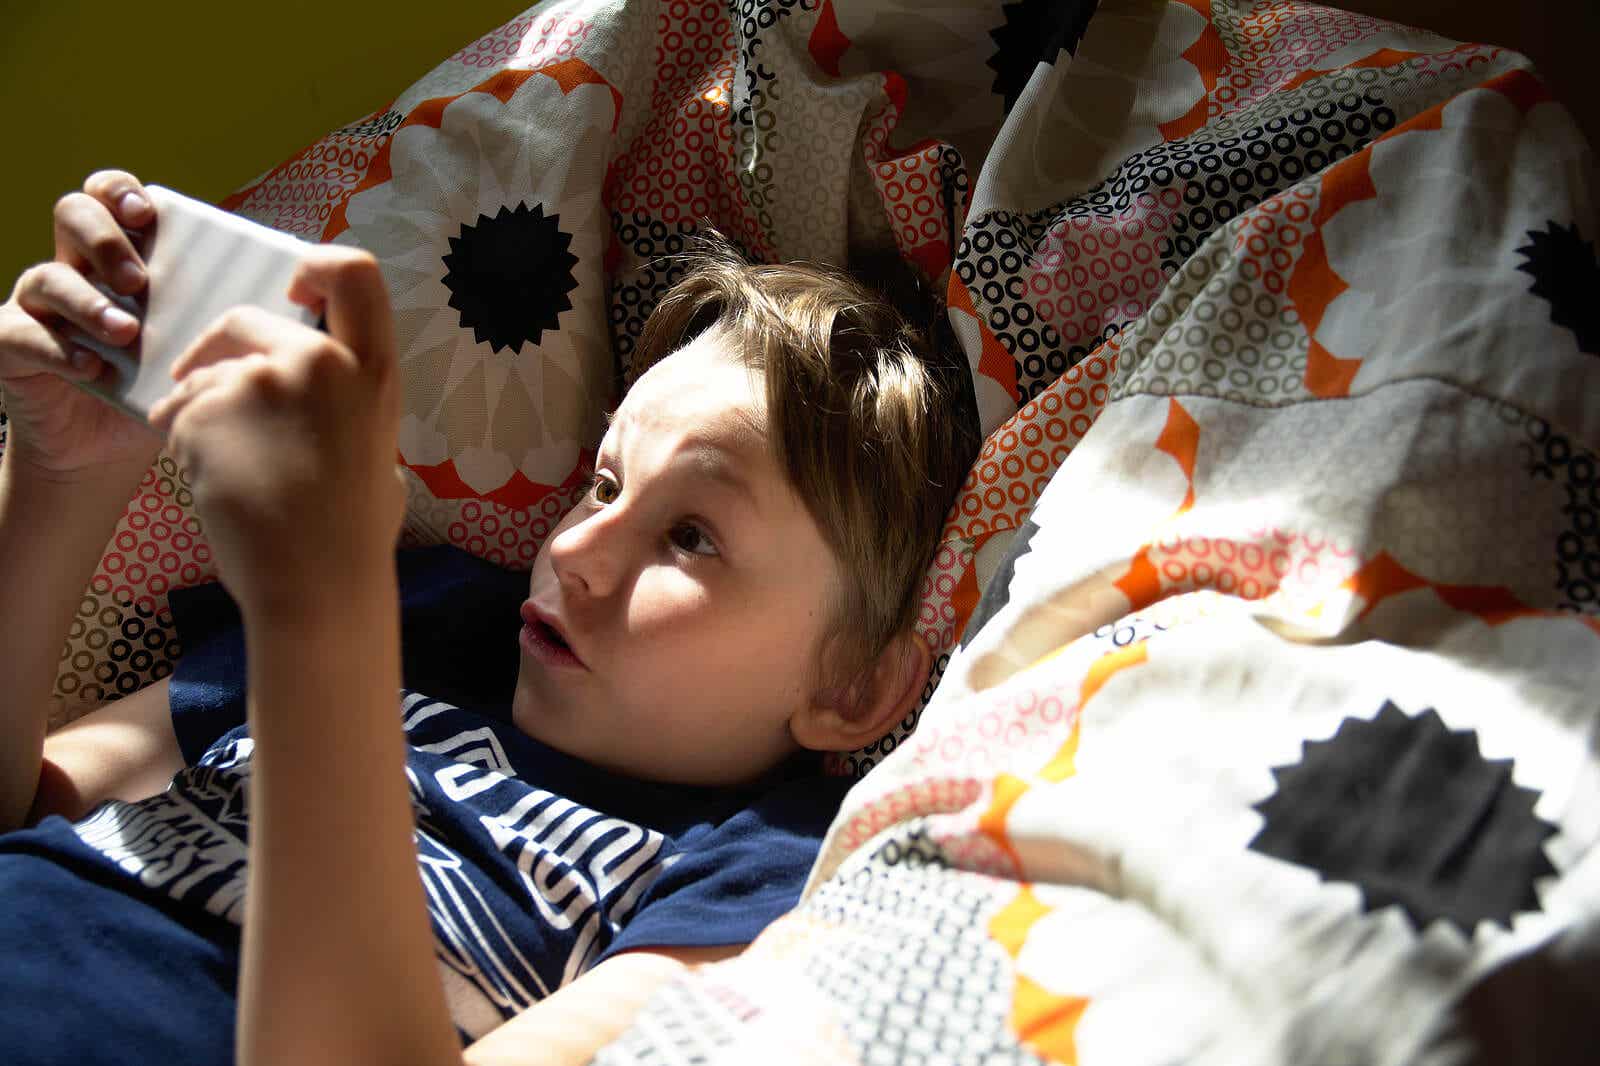 Child playing in bed with a cell phone.